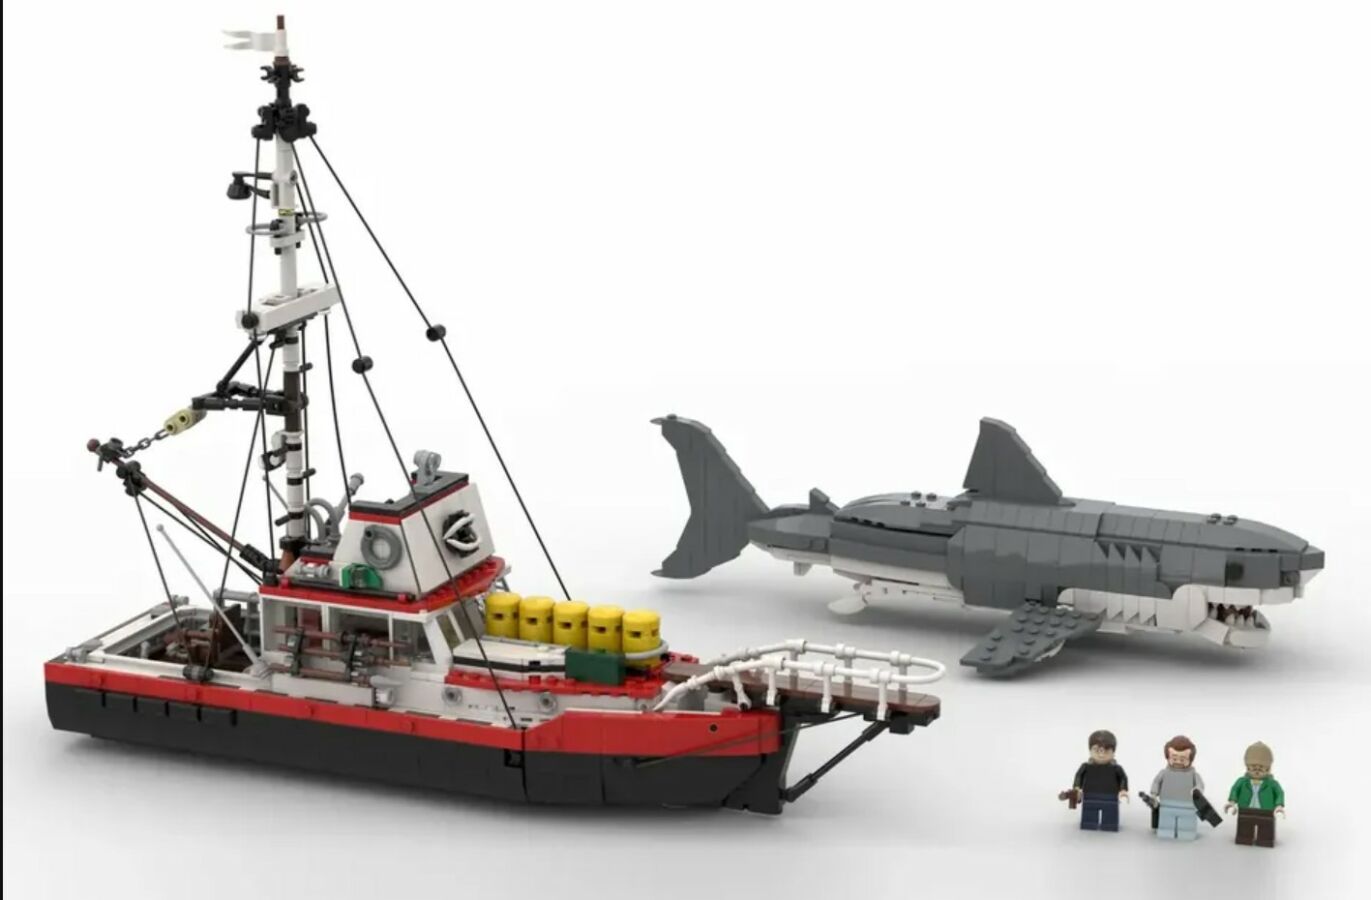 https://geekculture.co/wp-content/uploads/2023/06/lego-jaws.jpg